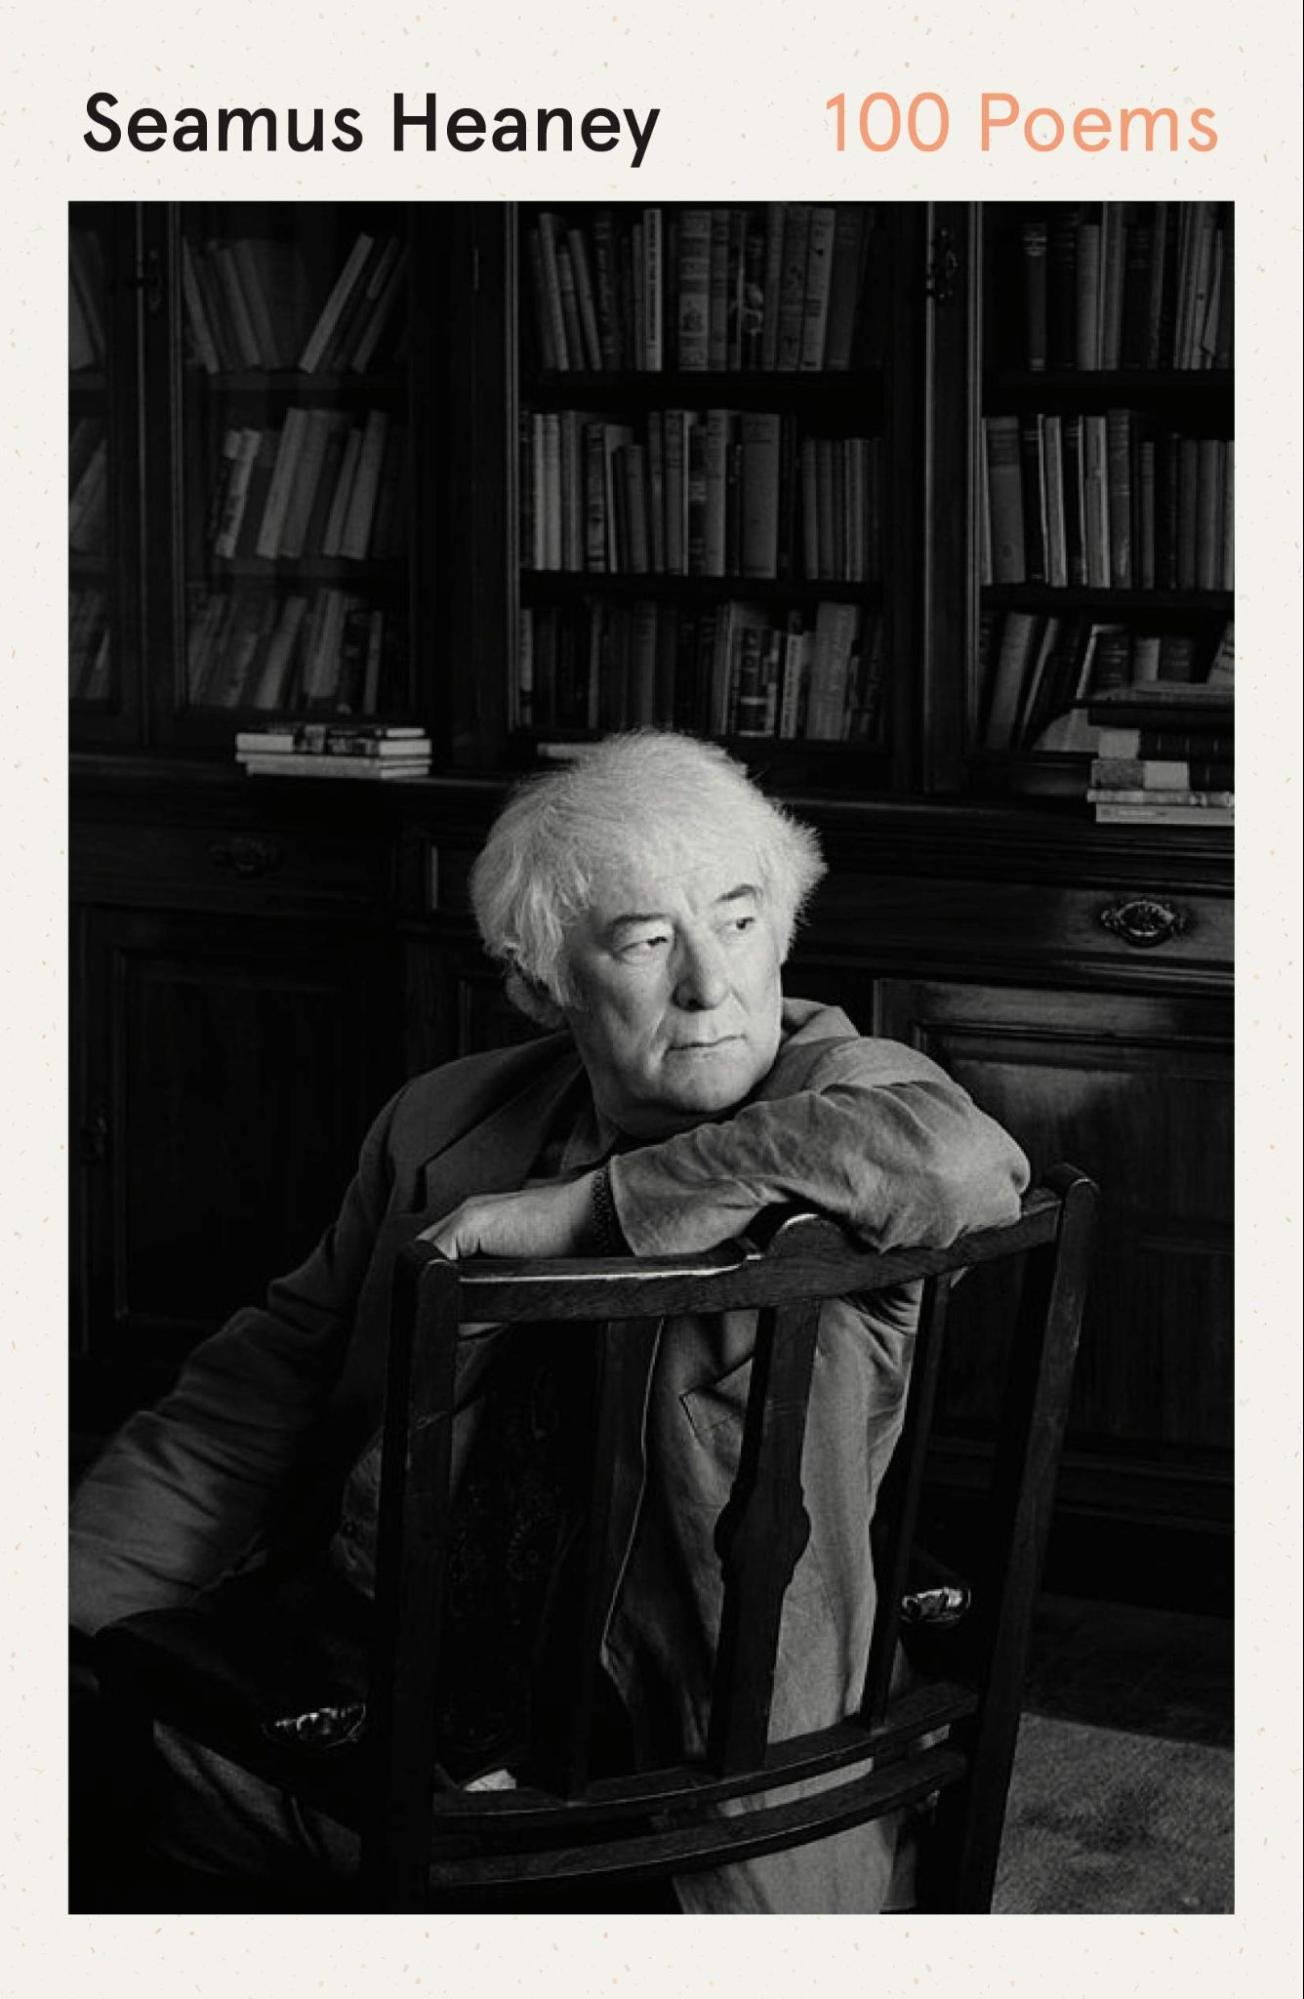 100 Poems by Seamus Heaney